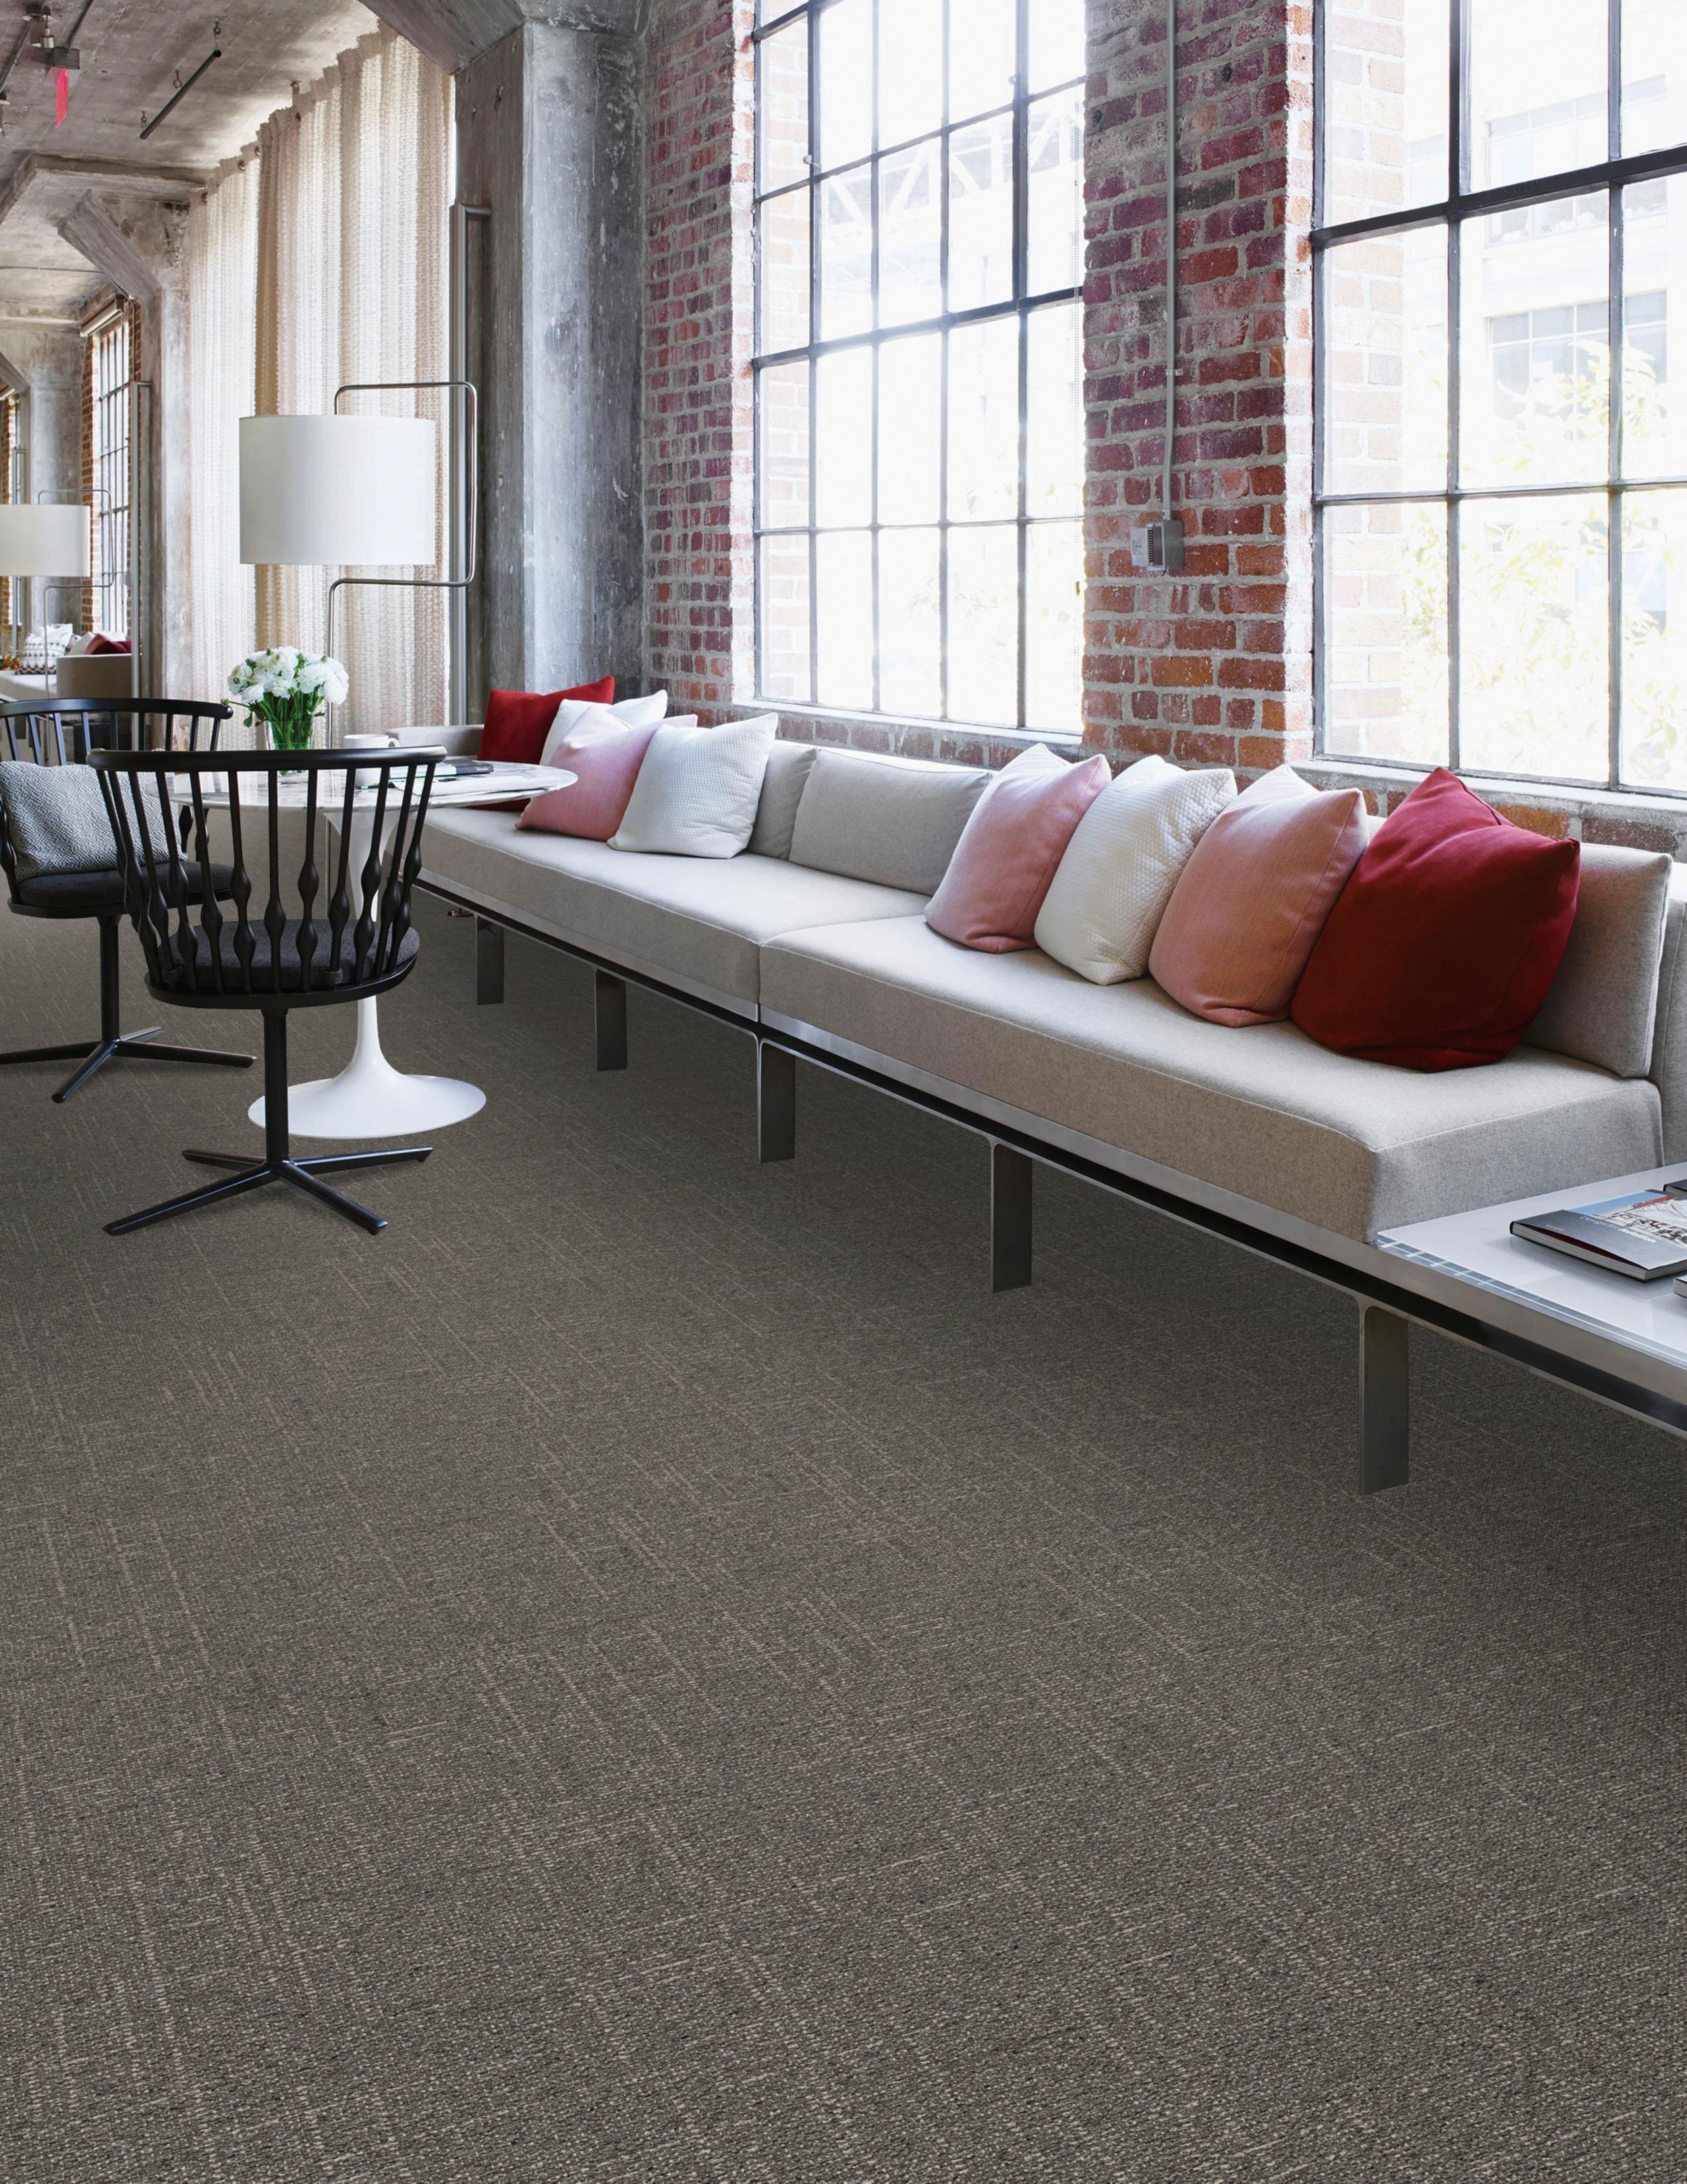 Interface DL901 carpet tile in public space with long couch image number 1